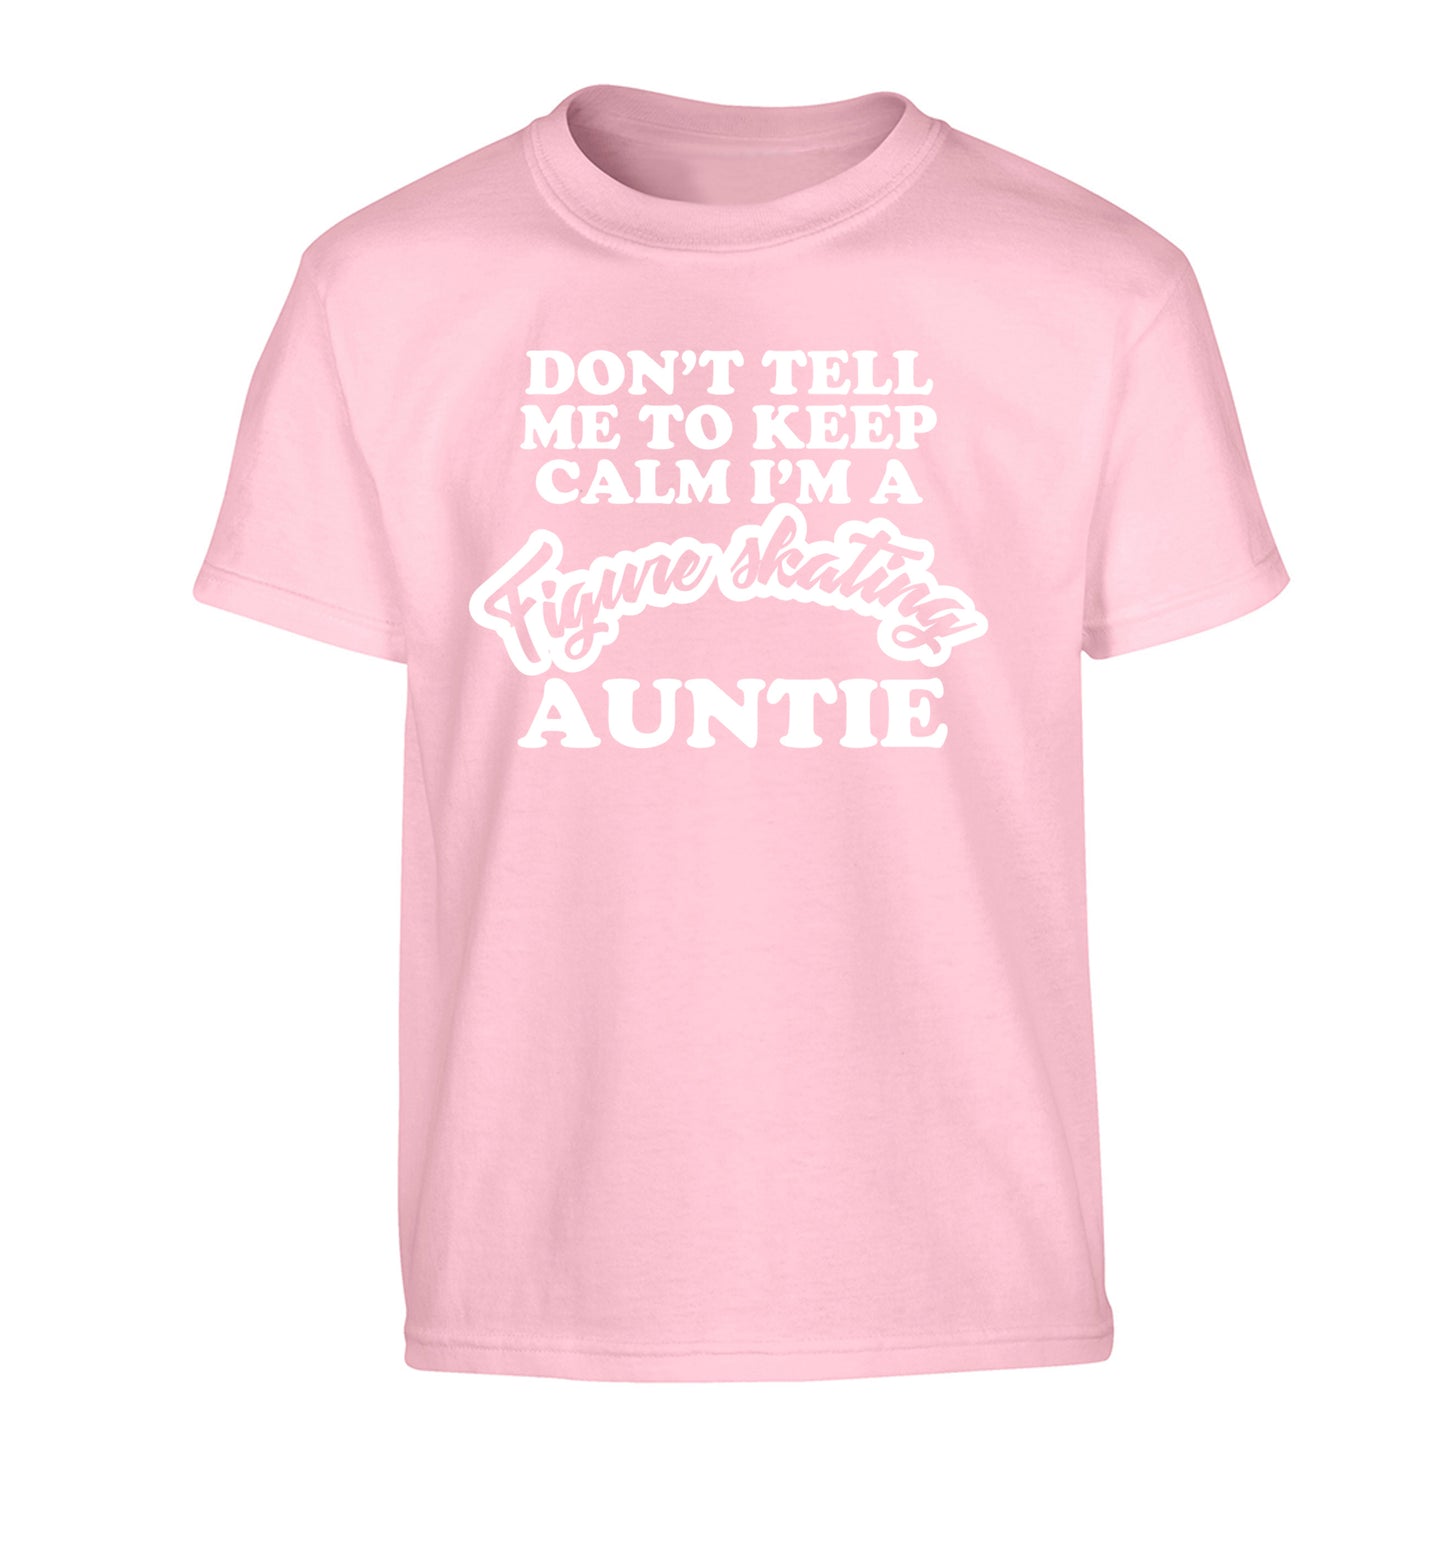 Don't tell me to keep calm I'm a figure skating auntie Children's light pink Tshirt 12-14 Years